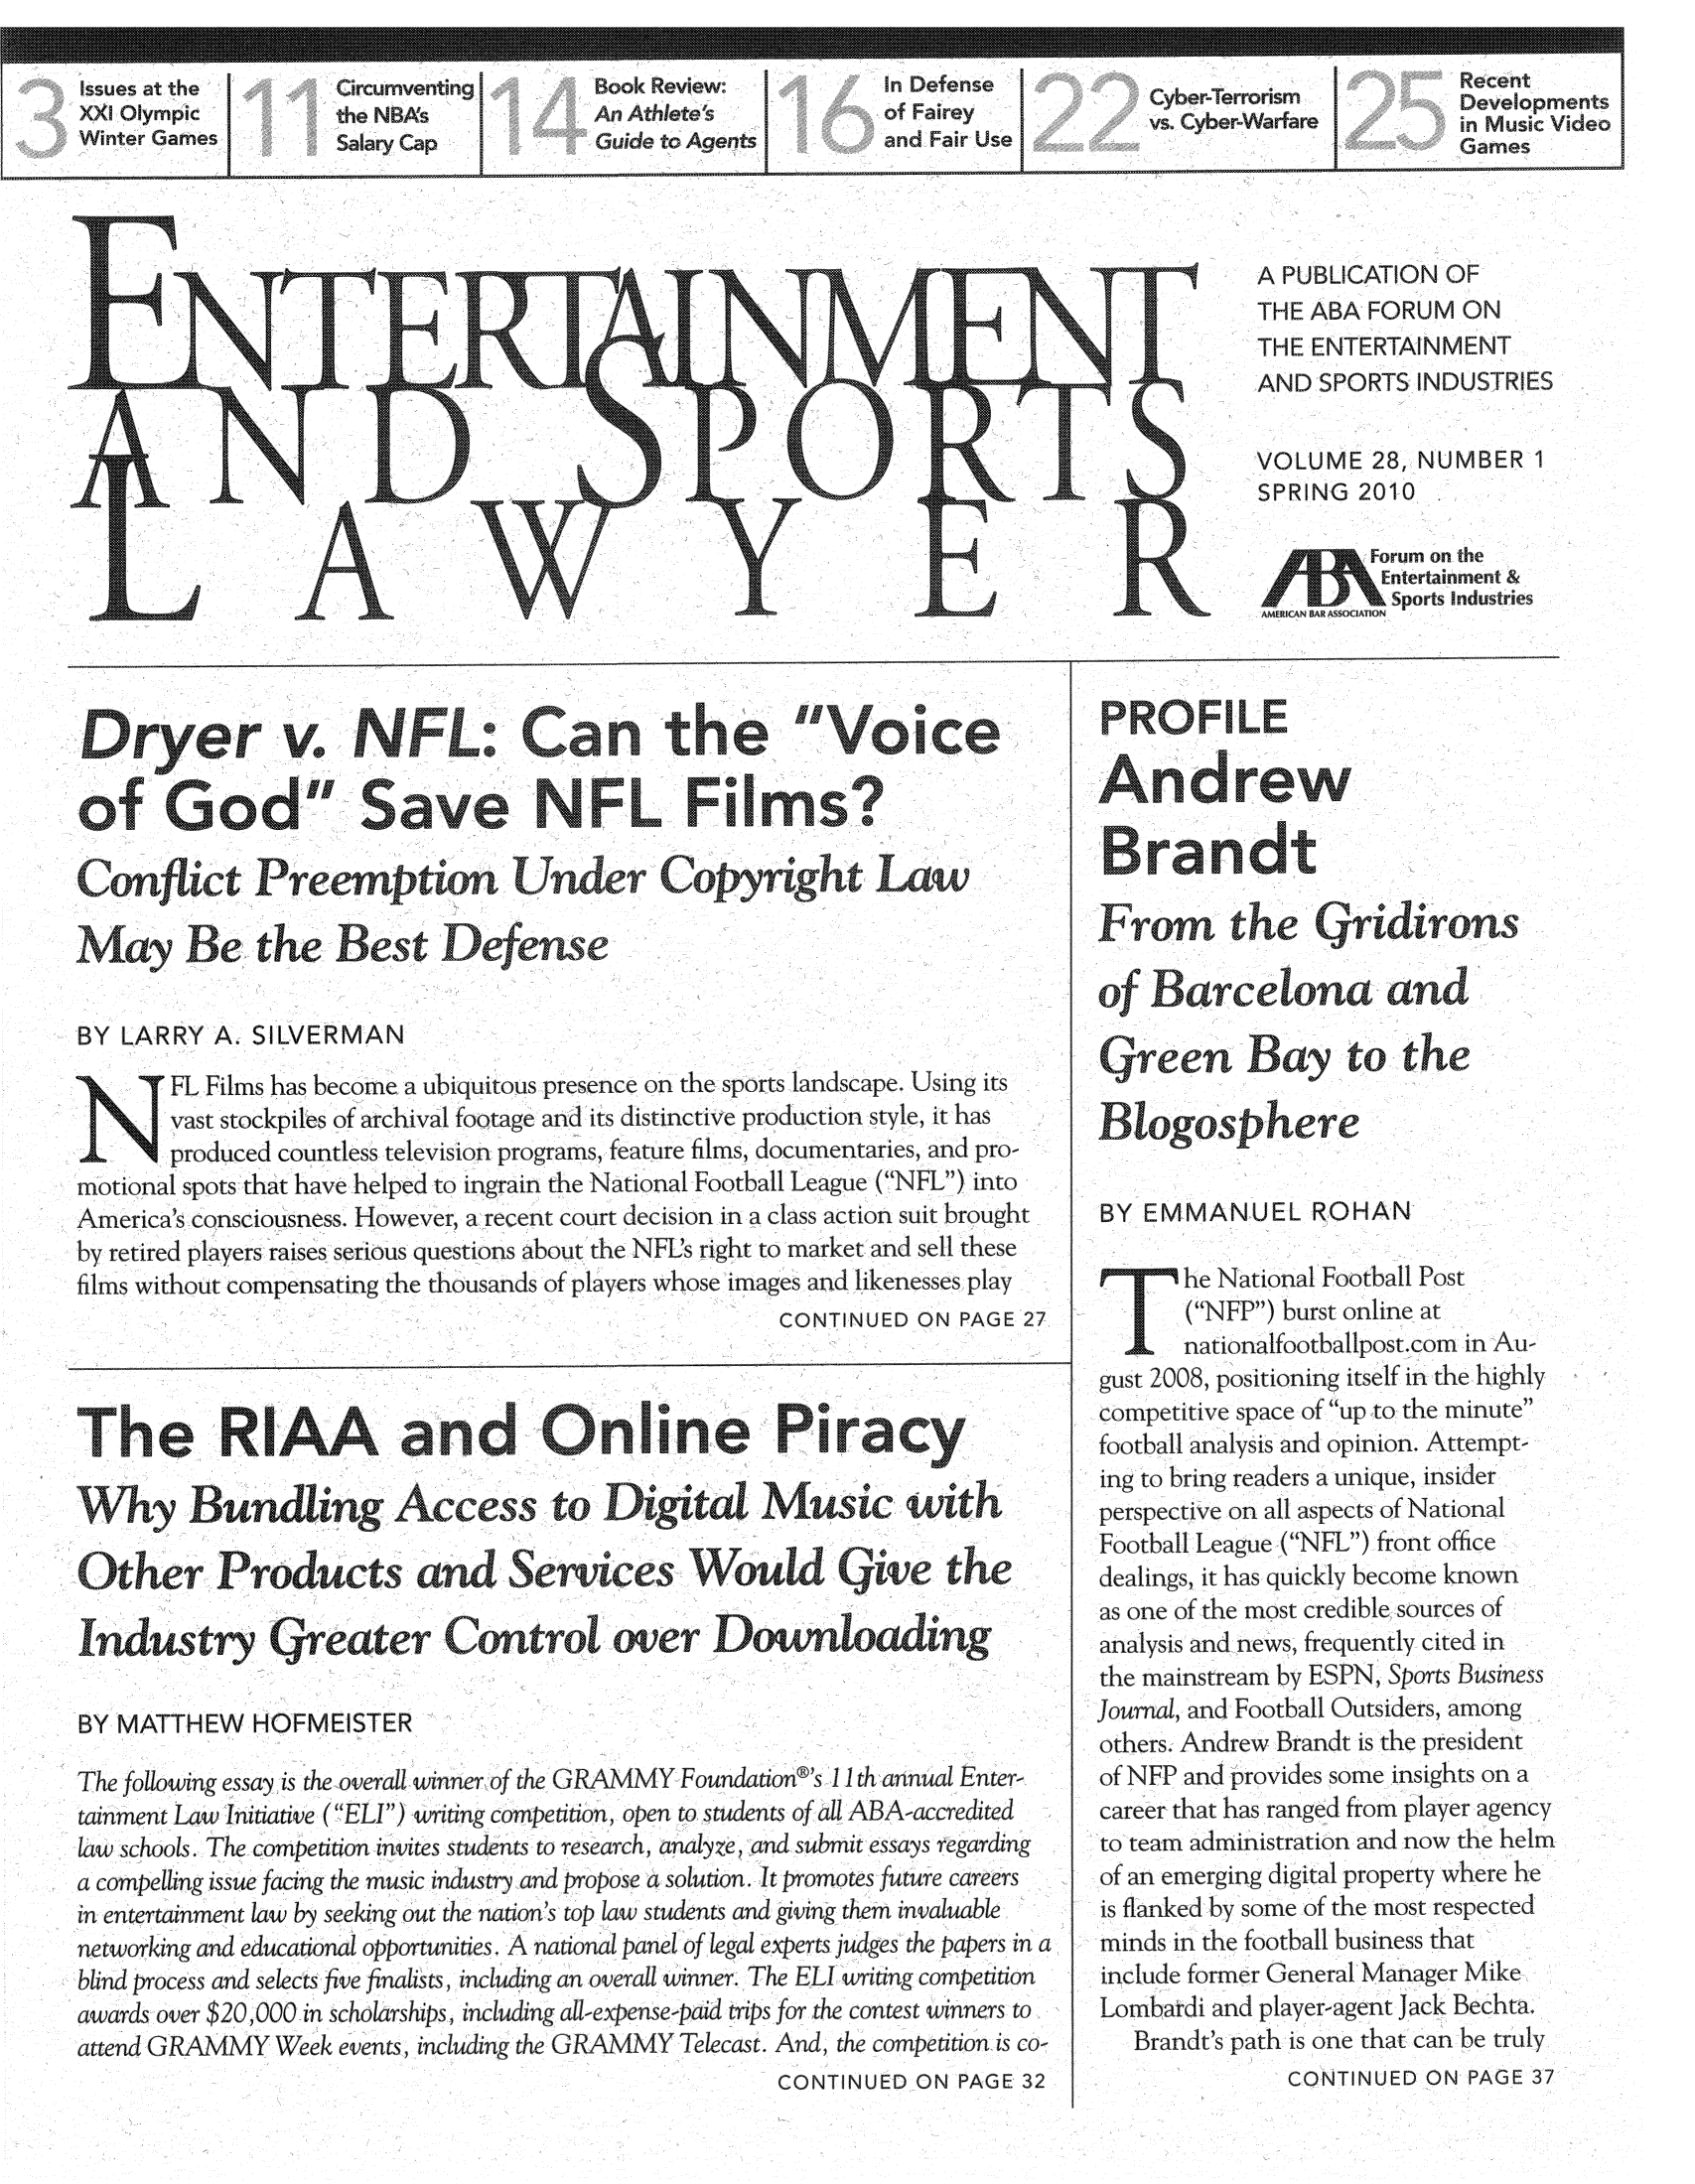 handle is hein.journals/entspl28 and id is 1 raw text is: A PUBLICATION OF
THE ABA FORUM ON
THE ENTERTAINMENT
AND SPORTS INDUSTRIES
VOLUME 28, NUMBER 1
SPRING 2010
Entertainment &
Sports Industries

ryer v. NFL*Ca                               th         ,,        ice
of       od Sv                         F F m?
Confct reeptLnUder Copyr                                    aw u
May ,1e the Best Defne
BY LARRY A. SILVERMAN
FL Films has become a ubiquitous presence on the sports landscape Using its
vast stockpiles of archival footage and its distinctive production style, it has
produced countless television programs, feature films, documentaries, and pro-
mriotional spots that have helped to ingrain the National Football League (NFL) into
America's consciousness. However, a recent court decision in a class action suit brought
by retired players raises serous questions about the NFIL's right to market and sell these
films without compensating the thousands of players whosc images and likenesses play
CONTINUED ON PAGE 27
Th         RAA'and OlePrcy,
h'-Viy Bundling Acc ess tol igitat MIusc withl
Other ProducandV - Services 1,ould                               icve the
nduustry Lreat er Controovmer Downdoading
BY MATTHEW HOFMEISTER
The following essay is the overall winner of the GRAMMY Foundatione's 11th annual Enter
tainment Law Initiative (ELI) writing competition, open to students of all ABA accredited
law schools. The competition invites students to research, analyze, and submit essays regarding
a compelling issue facing the music industry and propose a solution. It promotes future careers
in entertainment law by seeking out the nation's top law students and giving them invailuable
networking and educational opportunities. A national panel of legal experts judges the papers in a
blind process and selects five finalists, including an overall winner. The ELI writing competition
awards over $20,000 in scholarships, including all-expense-paid trips for the contest winners to
attend GRAMMY Week events, including the iRAMMY Telecast. And, the competition is co-
CONTINUED ON PAGE 32

BY EMMANUL ROHAN
Andrew
F     h tiothea  ridir os
o--f Bar celona antd
treen Bay- to the
BY EMMANUEL ROHAN
hie National Football Pot
(NEP) burst online at
nationalfootballpost.com in Au-
gust 2008, positioning itself in the highly
competitive space of up to the minutc
football analysis and opinion. Attempt-
ing to bring readers a unique, insider
perspective on all aspects of National
Football League (NFL) front office
dealings, it has quickly become known
as one of the most credible sourccs of
analysis and news, frequently cited in
the mainstream by ESPN, Sports Busine s
Journal, and Football Outsiders, among
others. Andrew Brandt is the president
of NFP and provides some insights on a
career that has ranged from player agency
to team administration and now the helrm
of an emerging digital property wherc he
is flanked by some of the most respected
minds in the football business that
include former General Manager Mike
Lombardi and player agent Jack Bechta
brandts path is one that can be truly
CONTINUED ON PAGE 37


